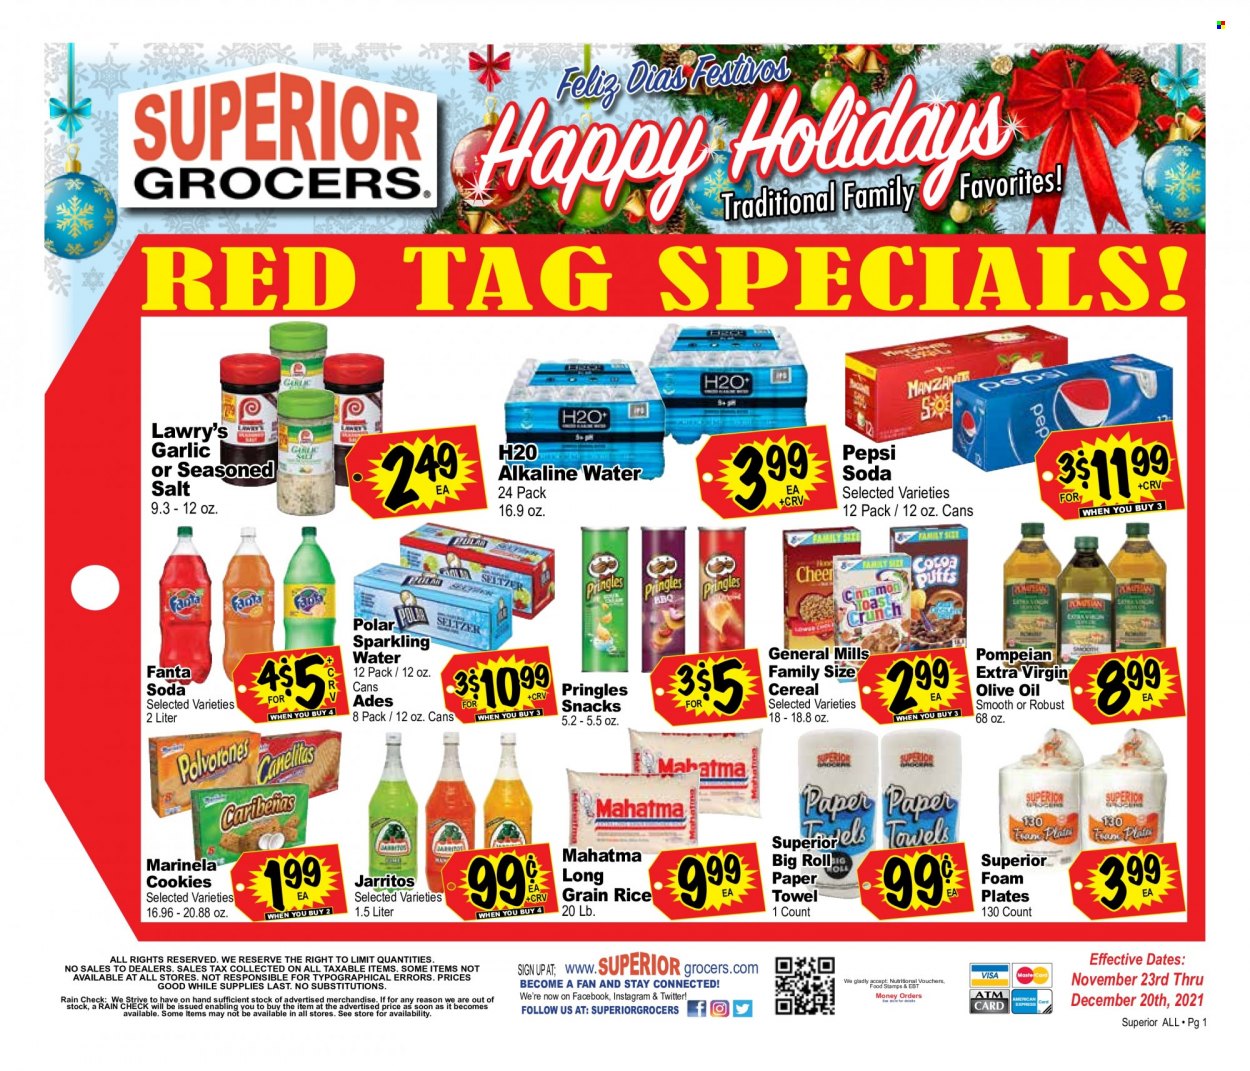 thumbnail - Superior Grocers Flyer - 11/23/2021 - 12/20/2021 - Sales products - garlic, cookies, snack, Pringles, salt, cereals, rice, long grain rice, extra virgin olive oil, olive oil, oil, Pepsi, Fanta, soda, sparkling water, alkaline water, plate, foam plates. Page 1.